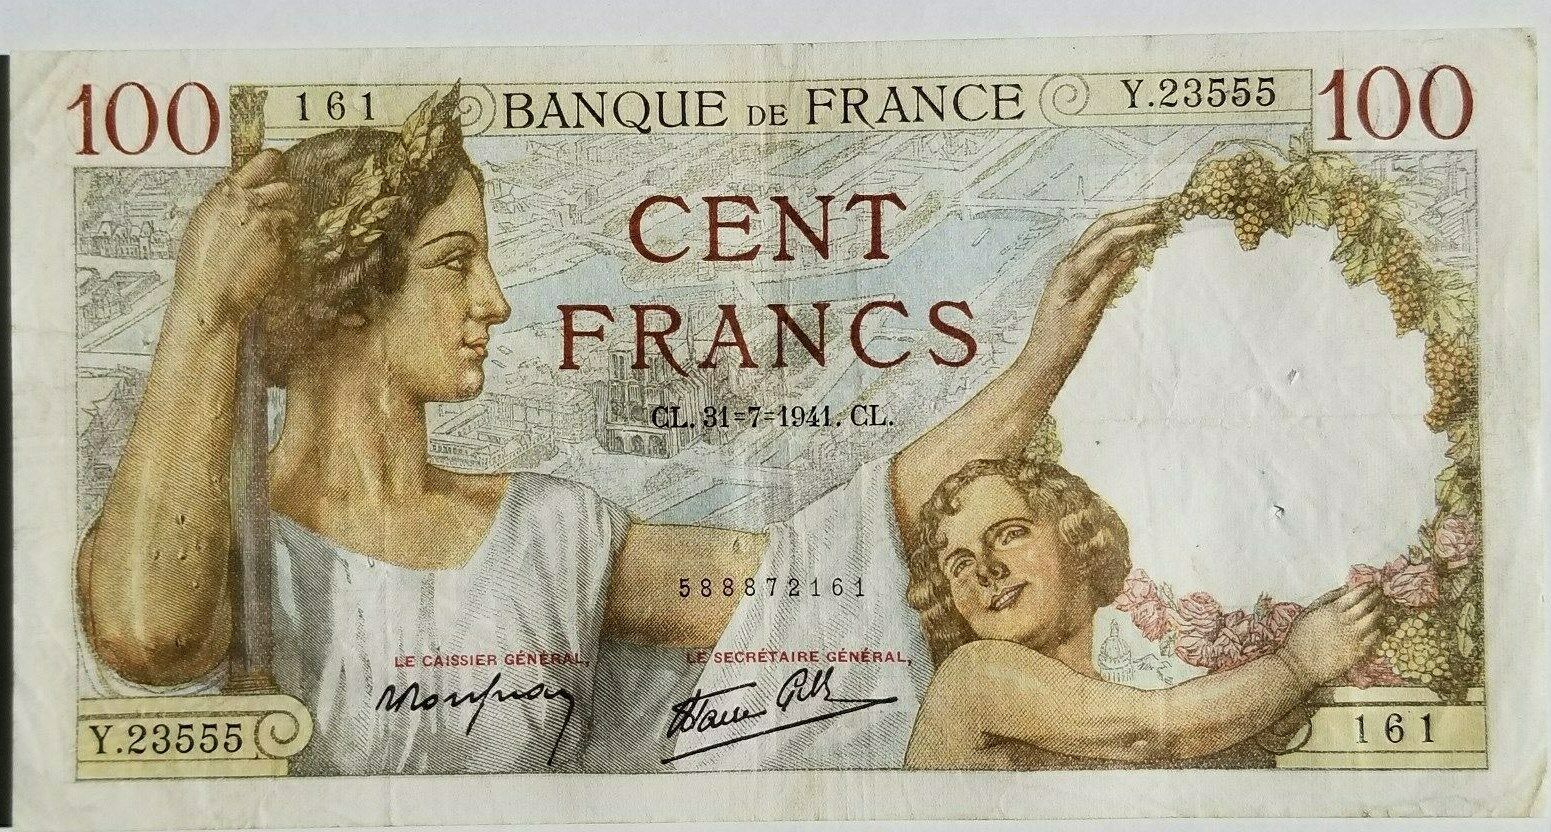 Primary image for FRANCE 100 CENT FRANCS BANKNOTE 1939 - 1942 XF NO RESERVE